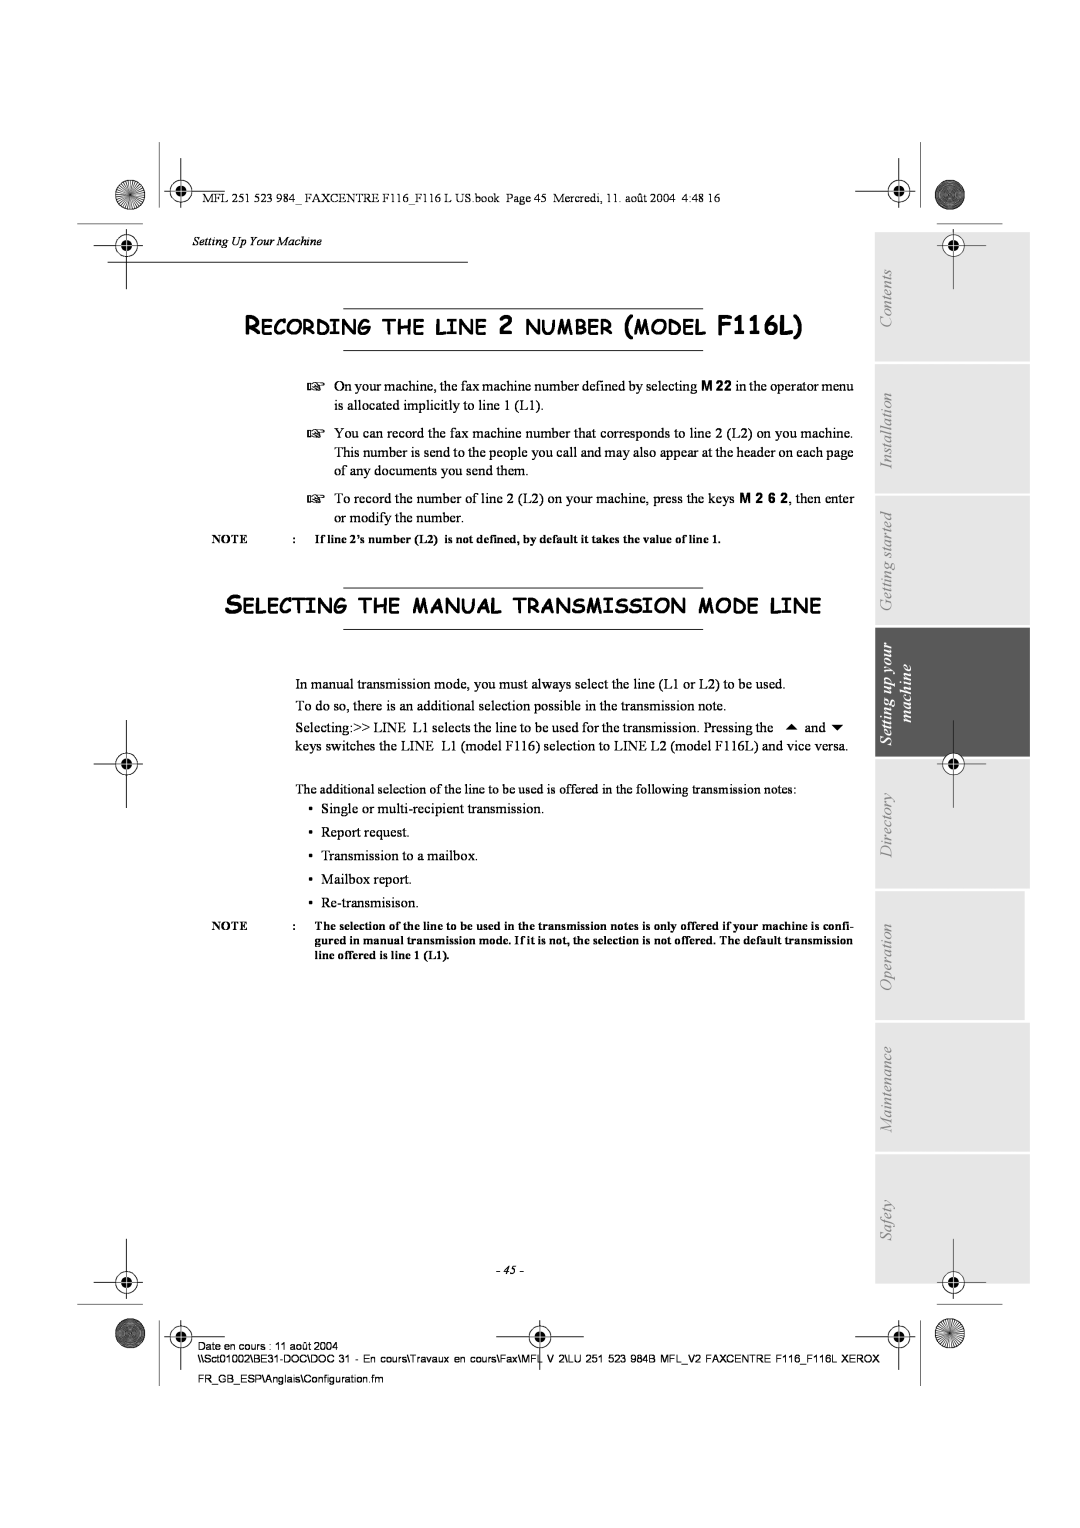 Xerox user manual RECORDING THE LINE 2 NUMBER MODEL F116L, Selecting The Manual Transmission Mode Line 